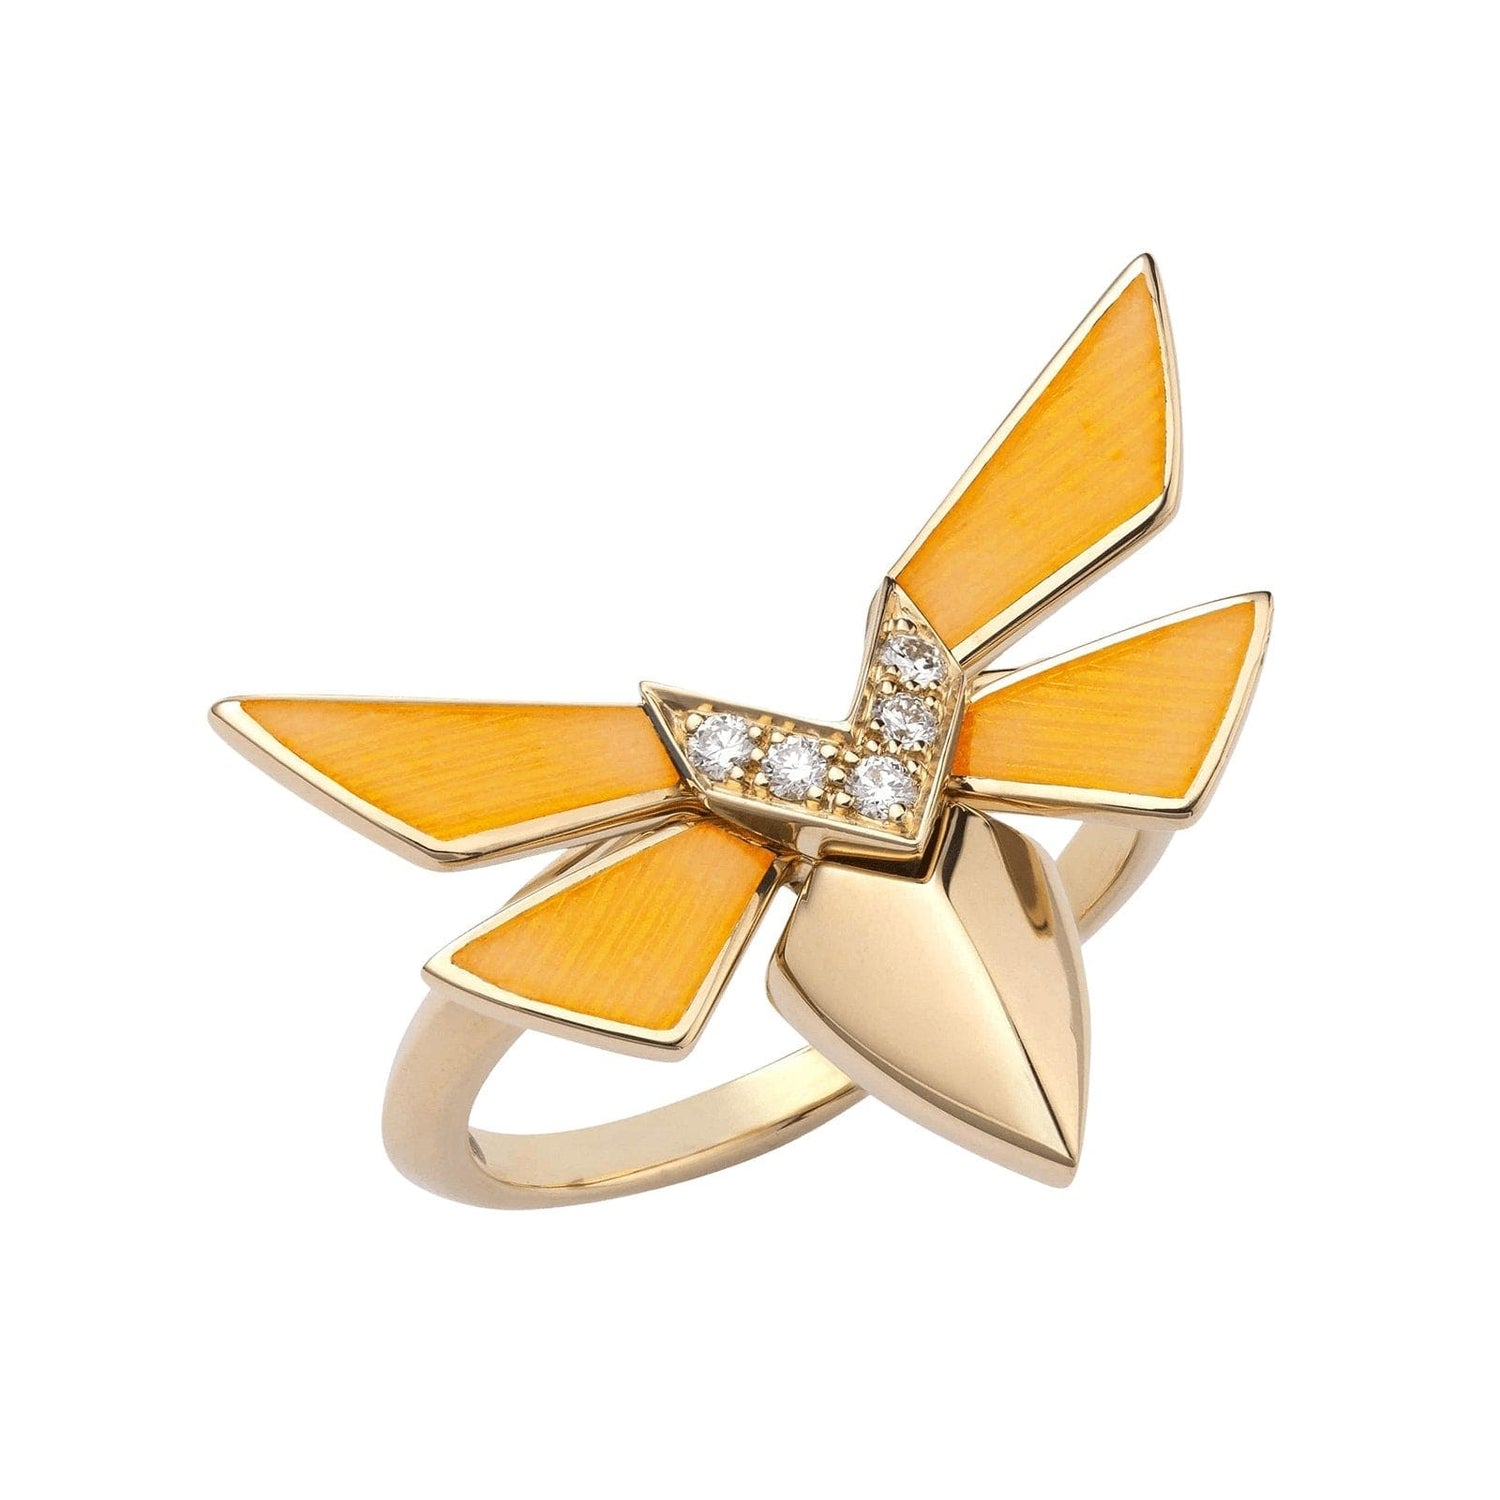 Jitterbug Stacking Ring with Diamond and Yellow Enamel Accents - Stephen Webster- Diamond Cellar